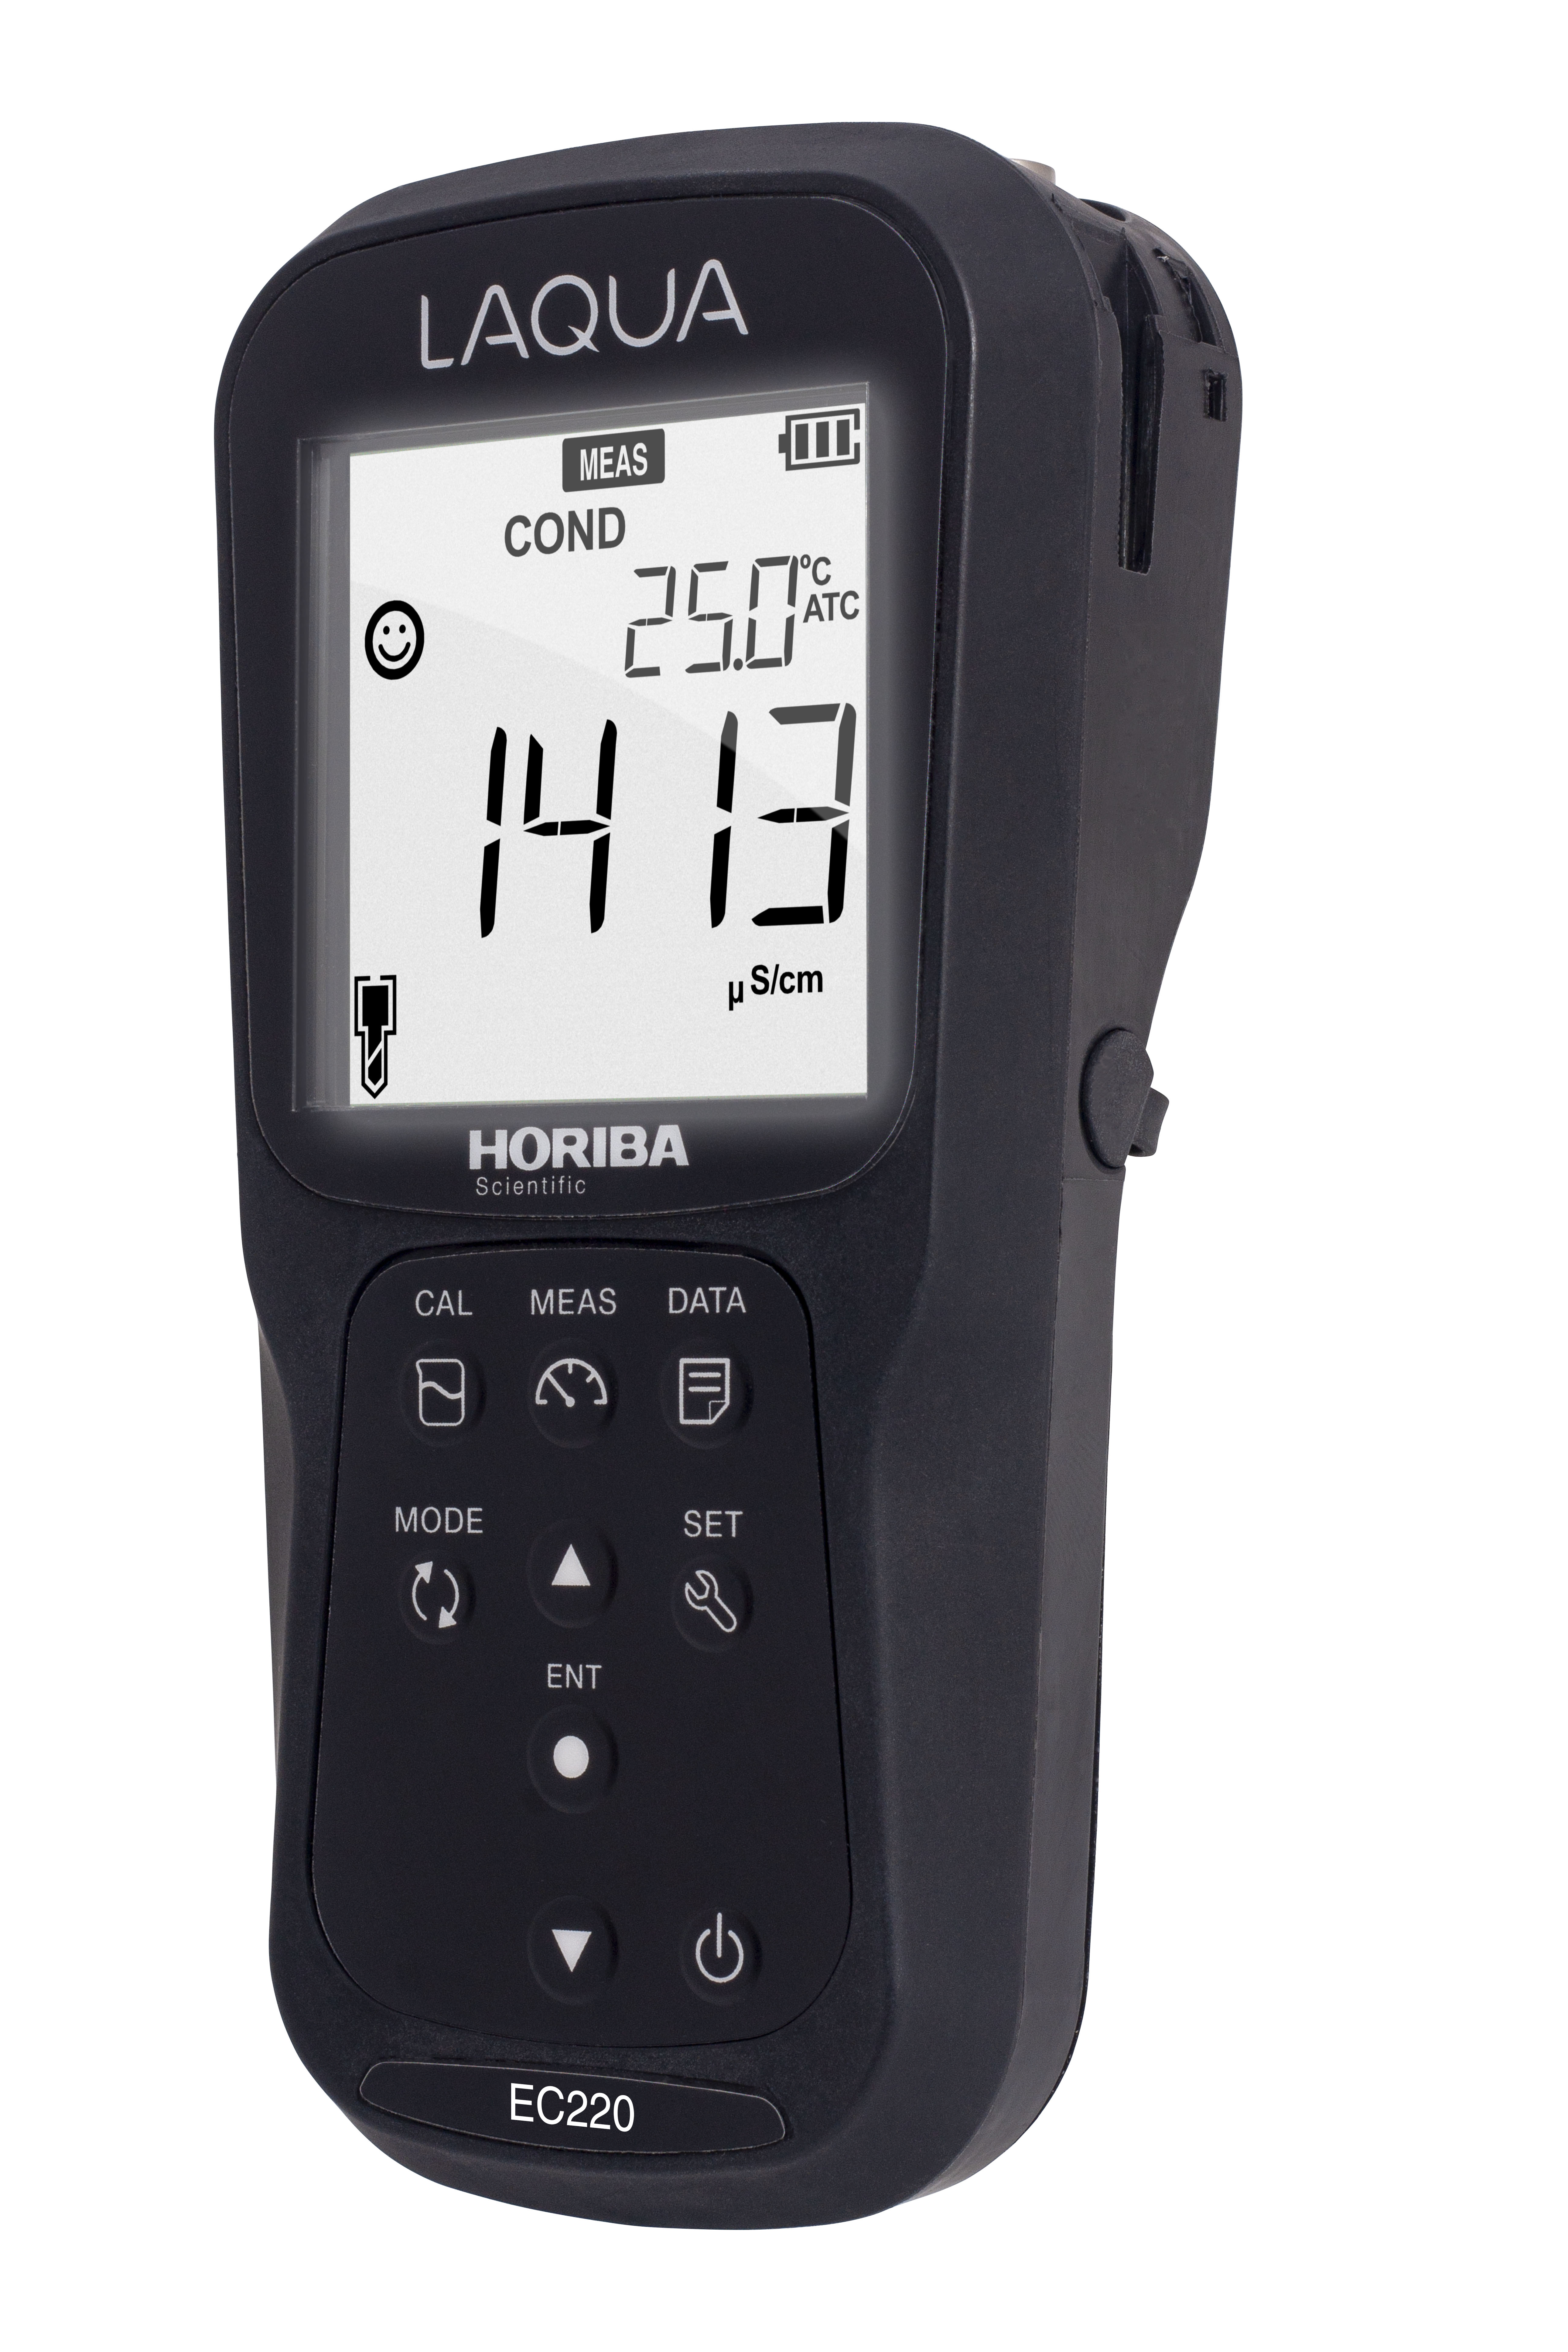 Horiba LAQUA EC220 kit conductivity, TDS, resistance, salinity and temperature hand-held meter with GLP measurement data storage and printer function in carrying case